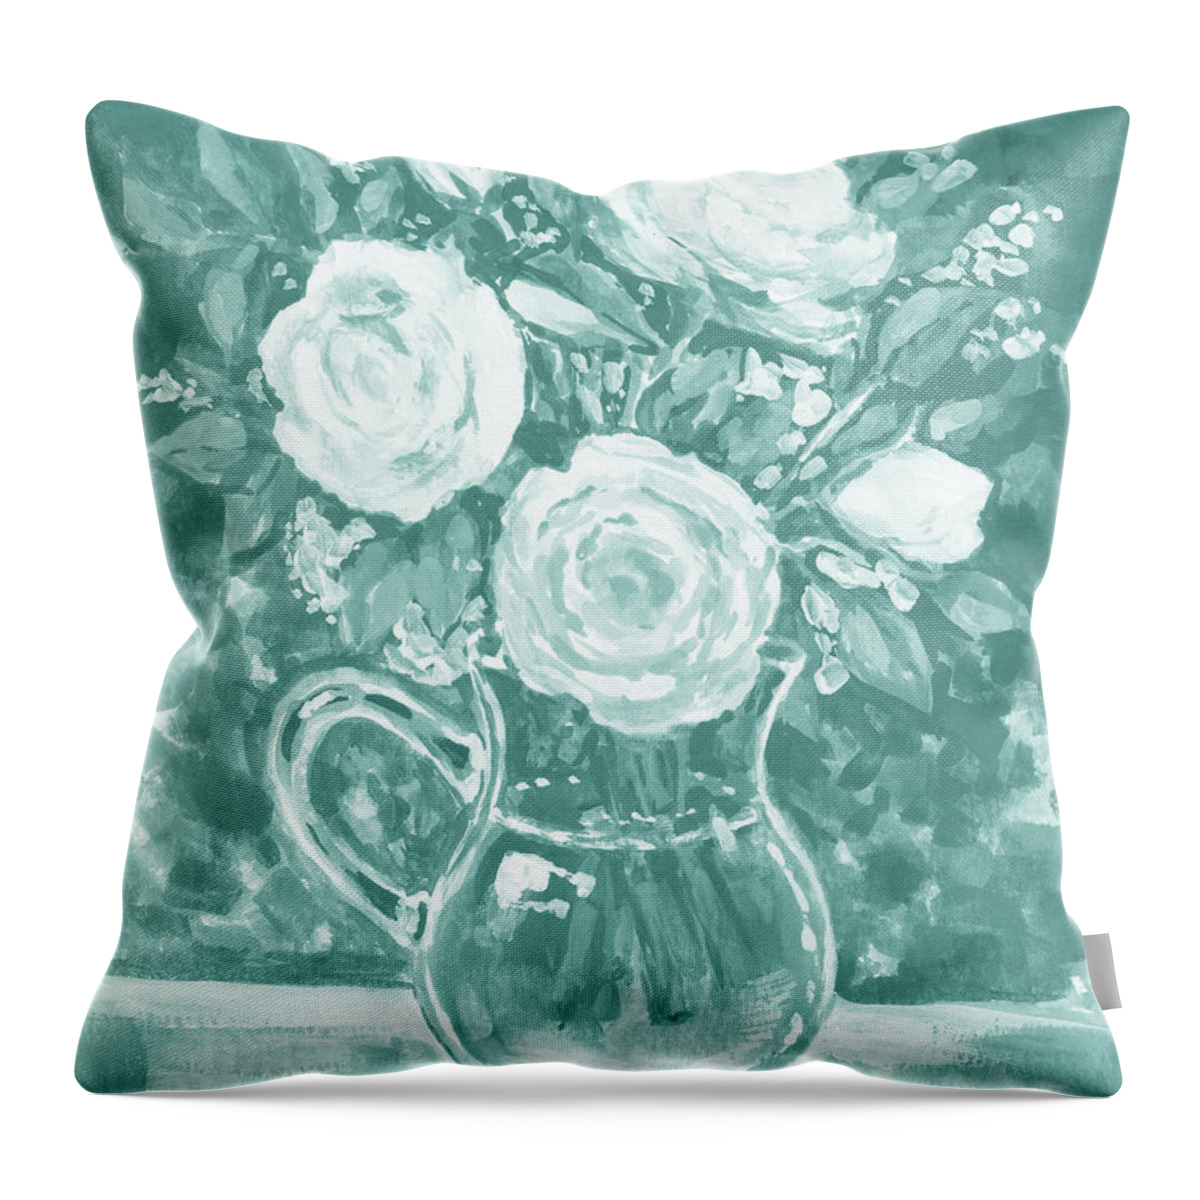 Flowers Throw Pillow featuring the painting Floral Impressionism Soft And Cool Vintage Pallet Summer Flowers Bouquet IX by Irina Sztukowski